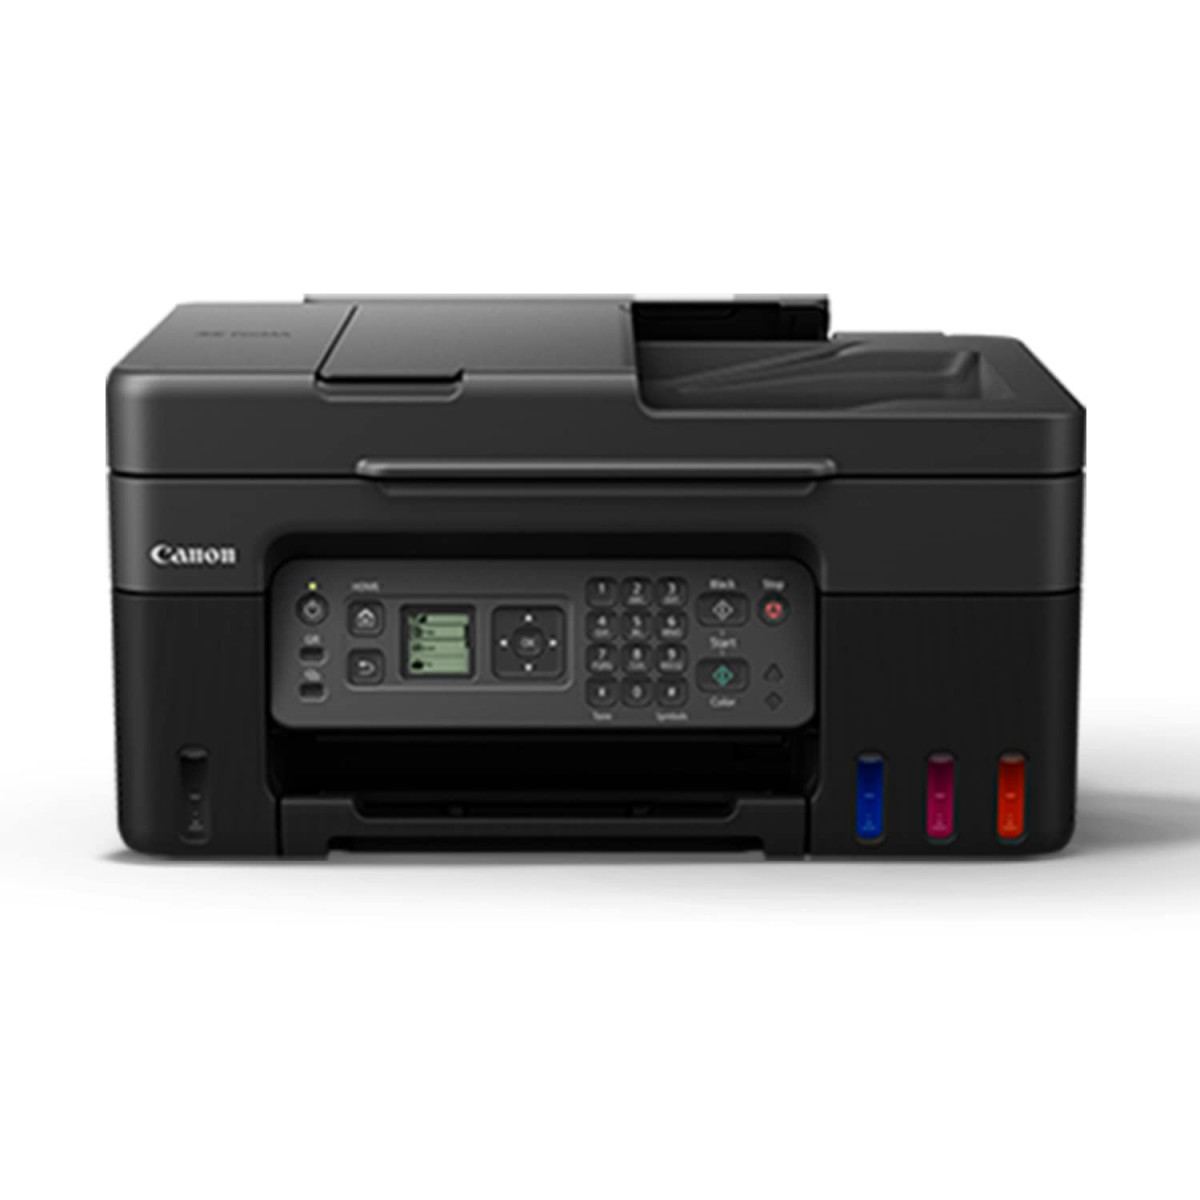 Canon PIXMA MegaTank G4770 All-in-one (Print, Scan, Copy) Wireless Inktank Printer with ADF and Fax